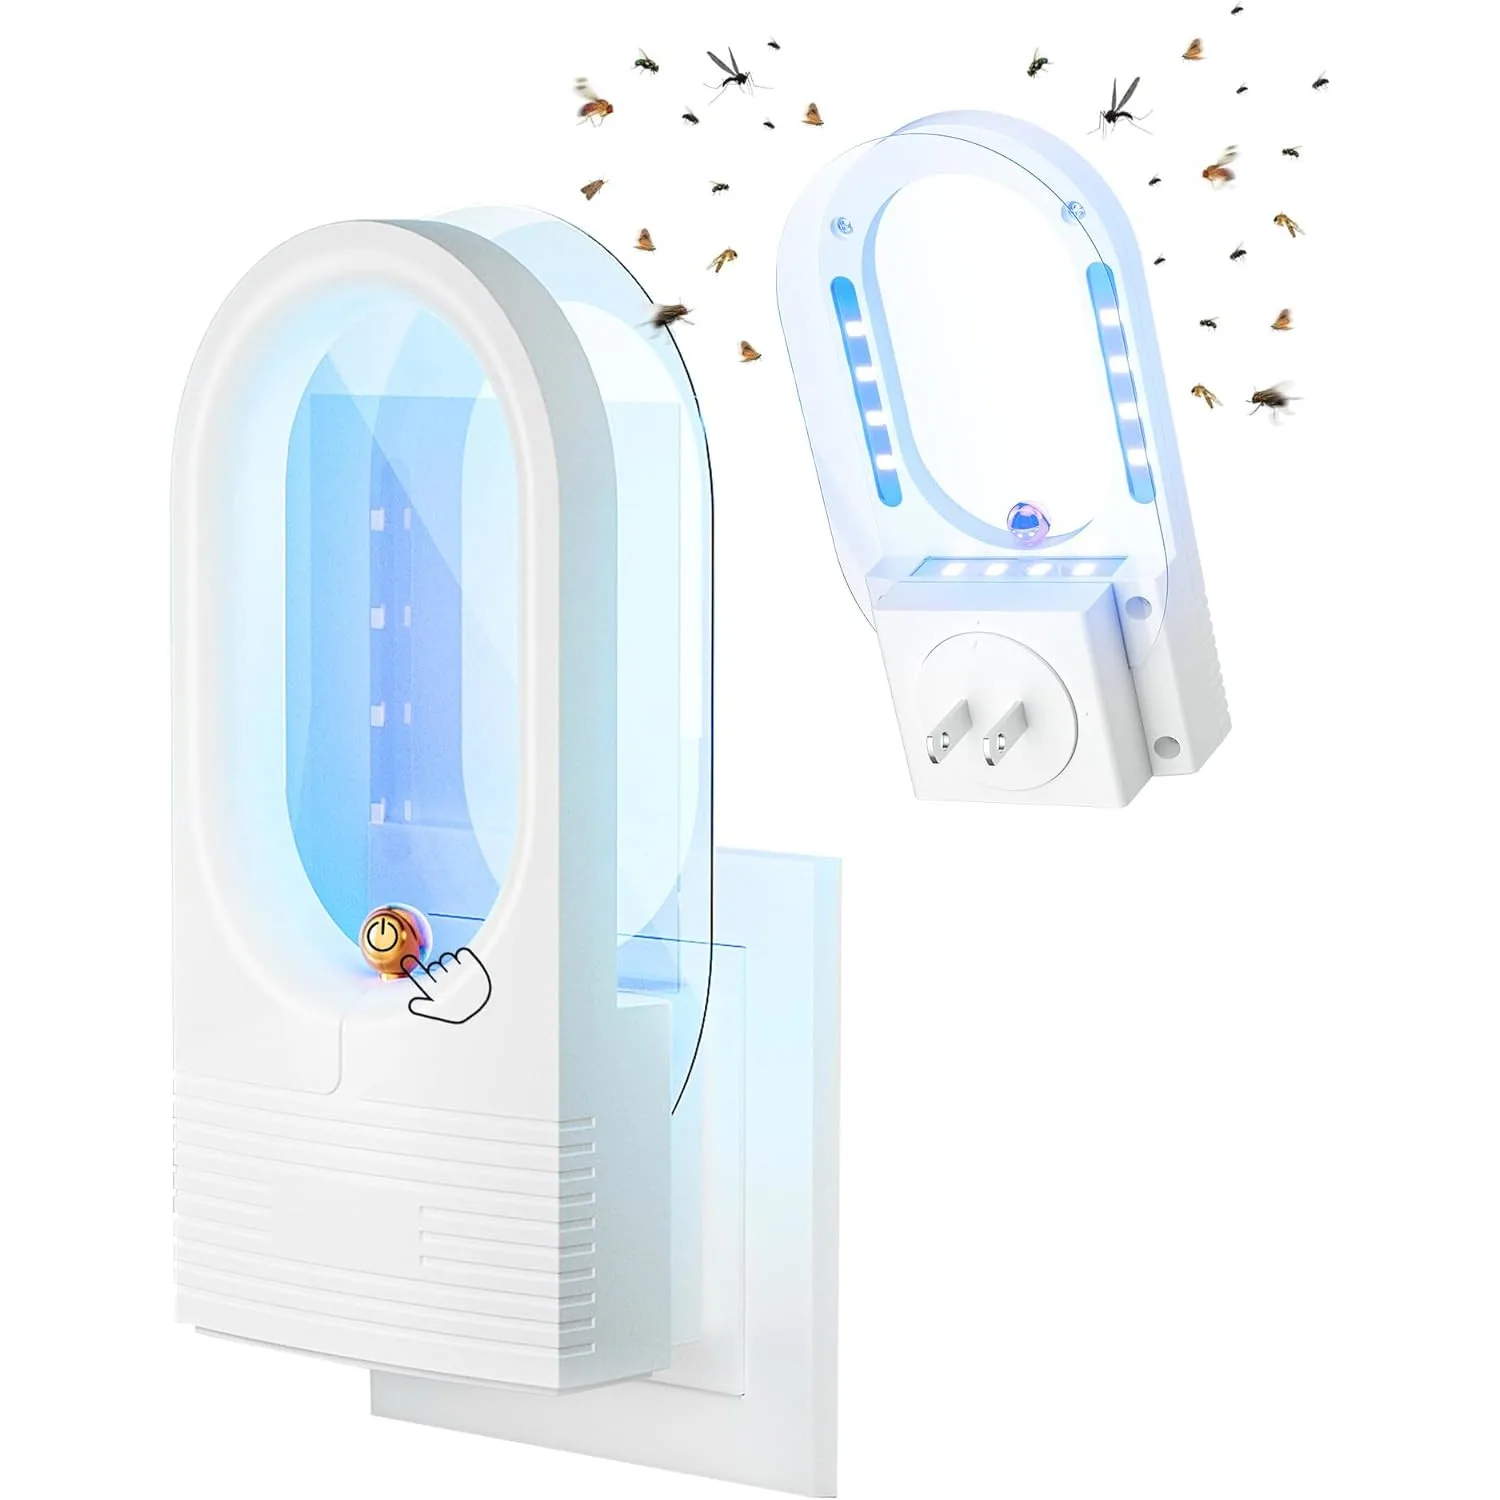 Gthbugor Insect Trap